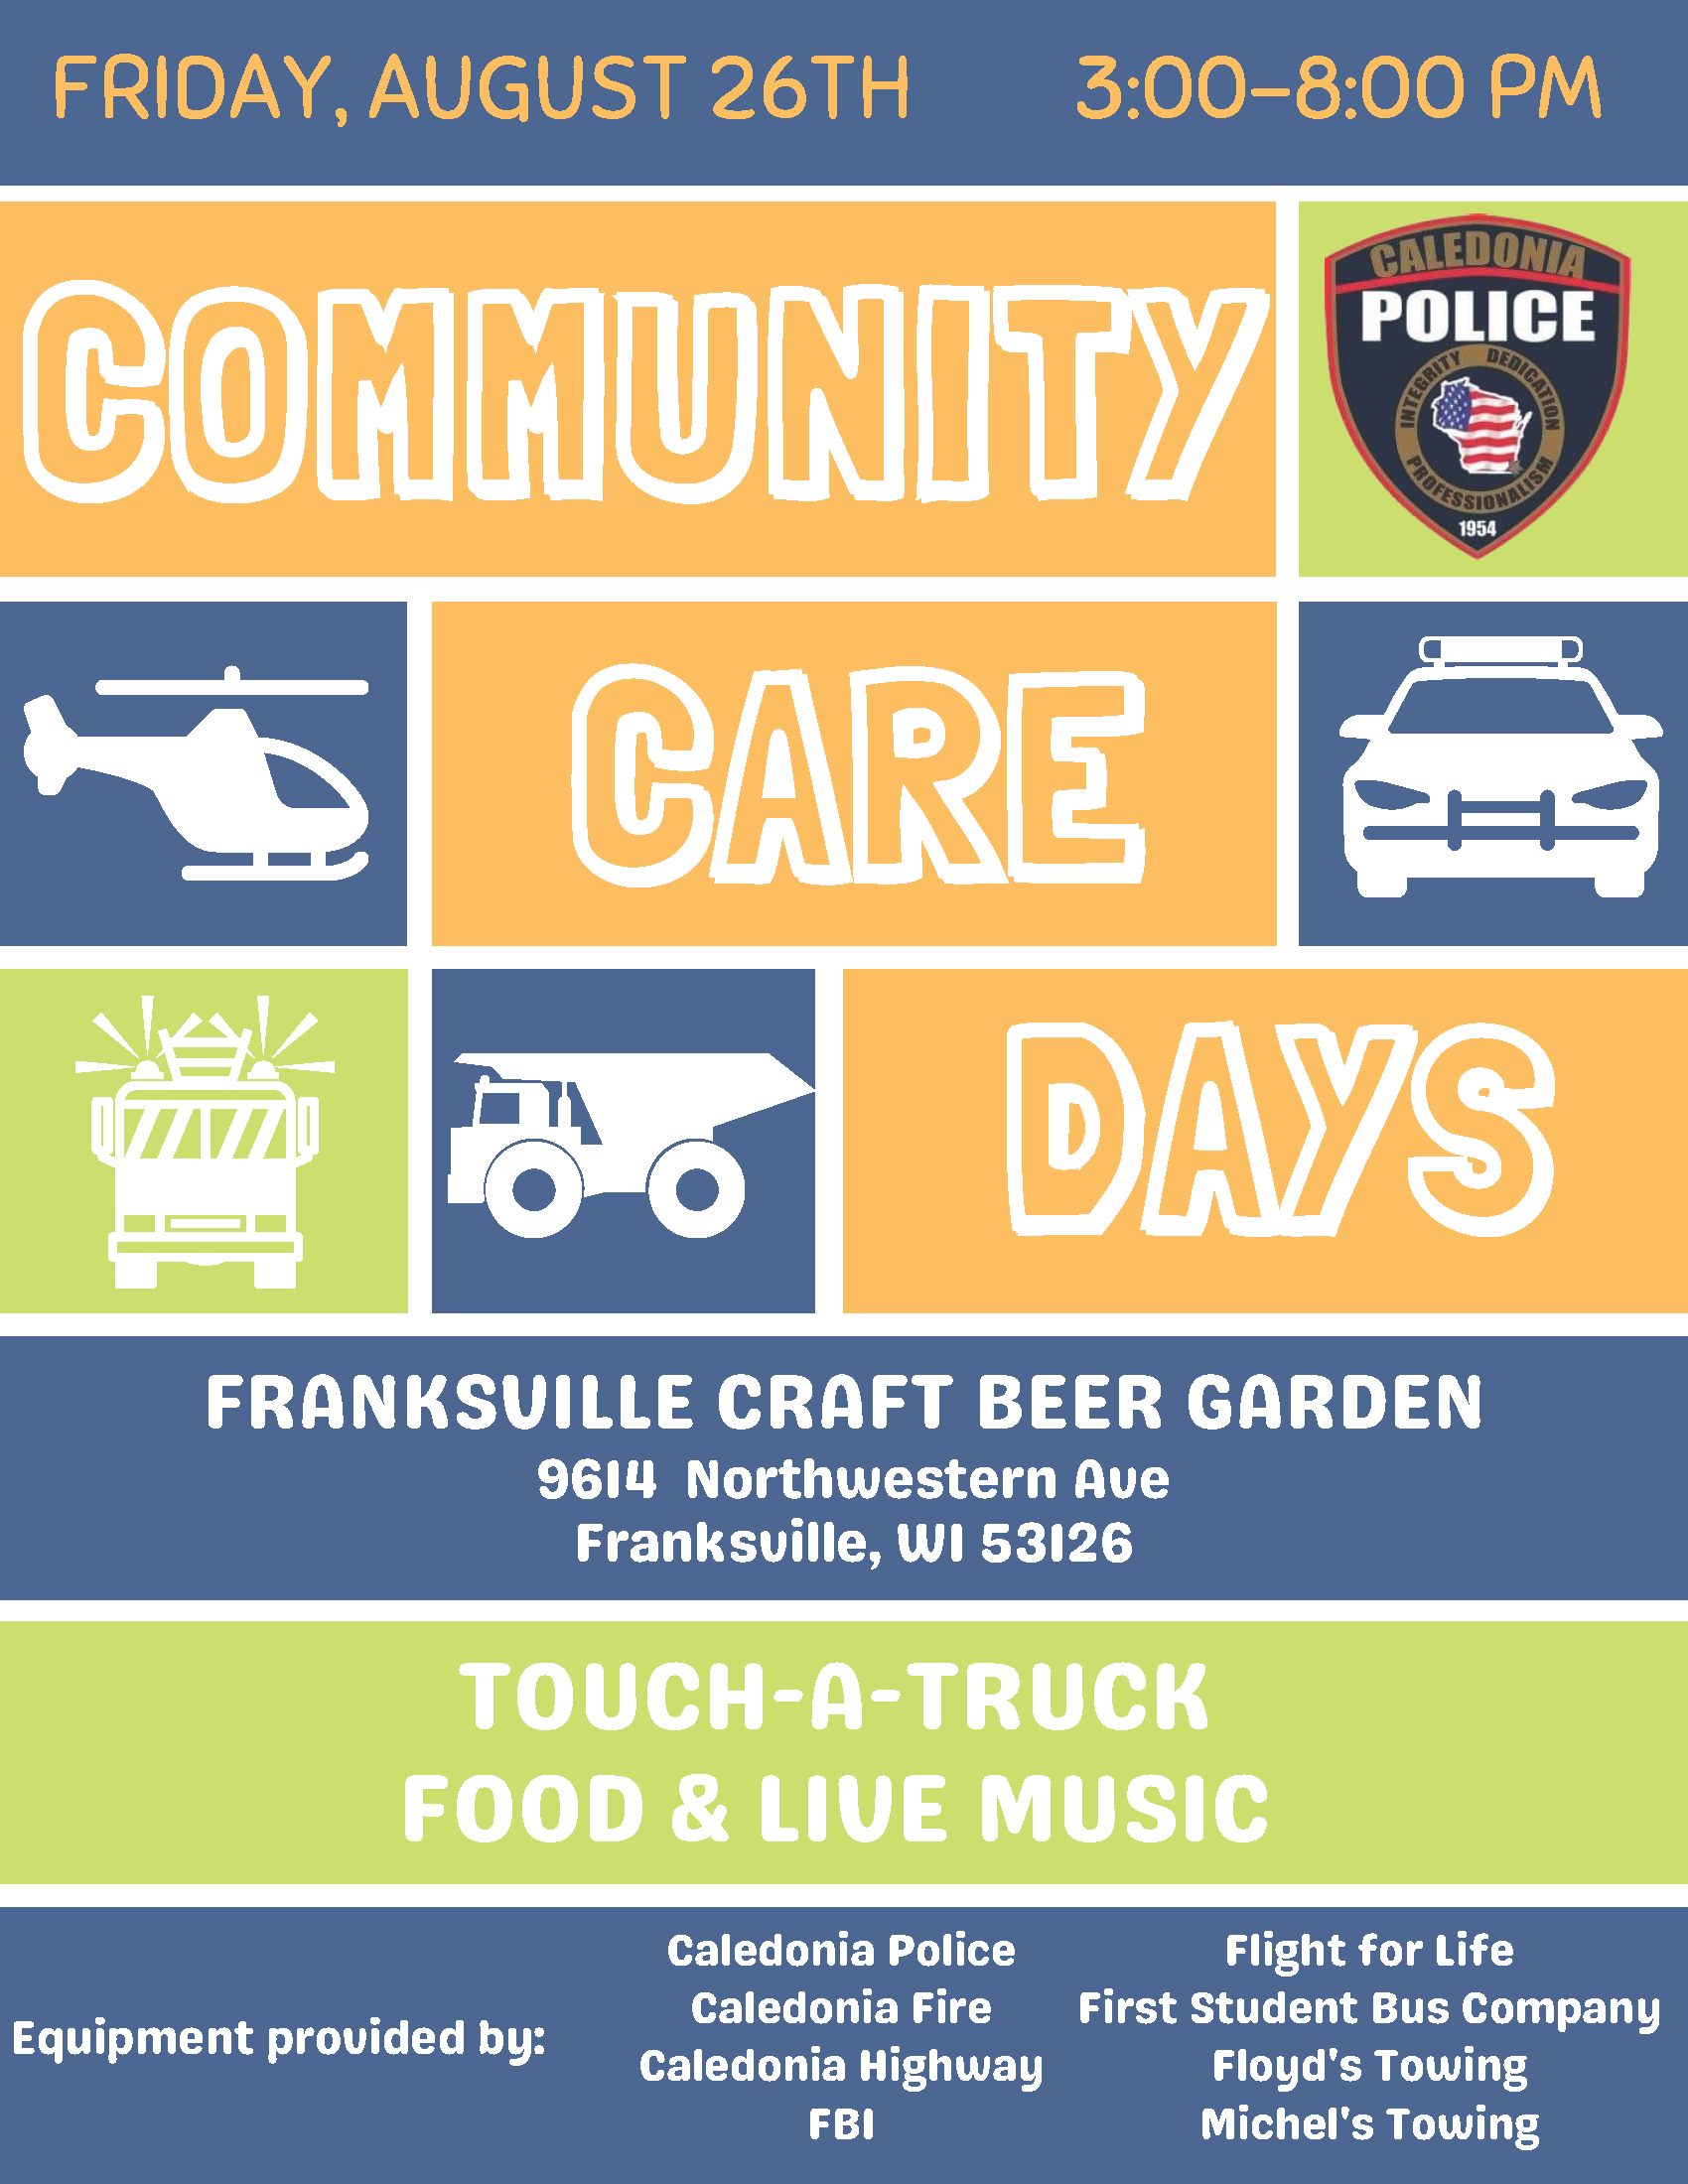 Friday, August 26, 3-8 p.m. Community Care Days. Franksville Craft Beer Garden, 9614 Northwestern Avenue, Franksville, WI 53126. Touch-a-Truck. Food and live music. Equipment provided by Caledonia Police, Caledonia Fire, Caledonia Highway, FBI, Flight for Life, First Student Bus Company, Floyd's Towing and Michel's Towing.